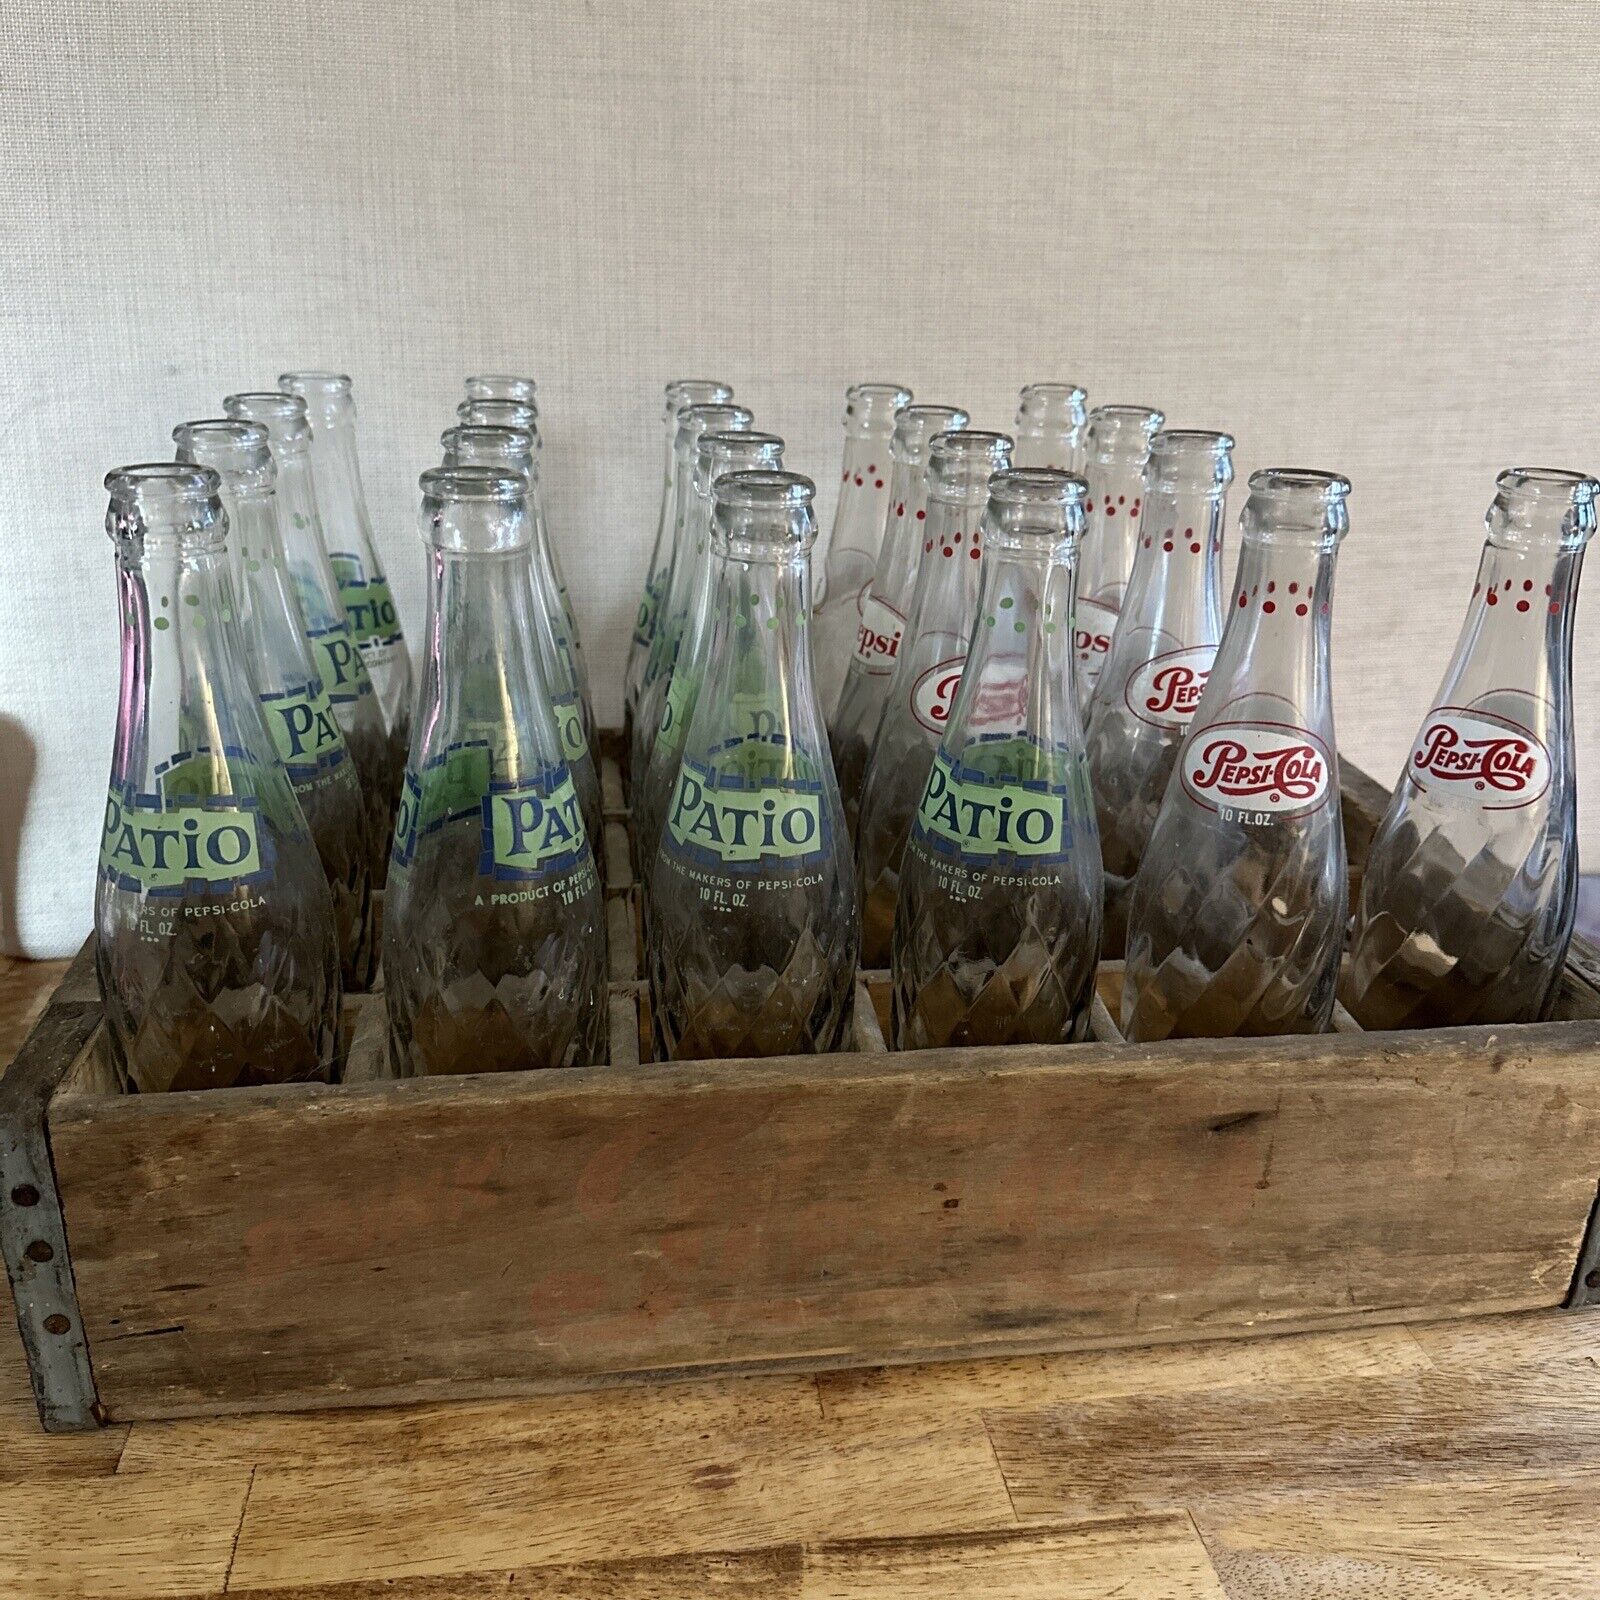 Vintage Patio Pepsi Cola Glass Bottles And Wooden Crate That Holds 24 Bottles